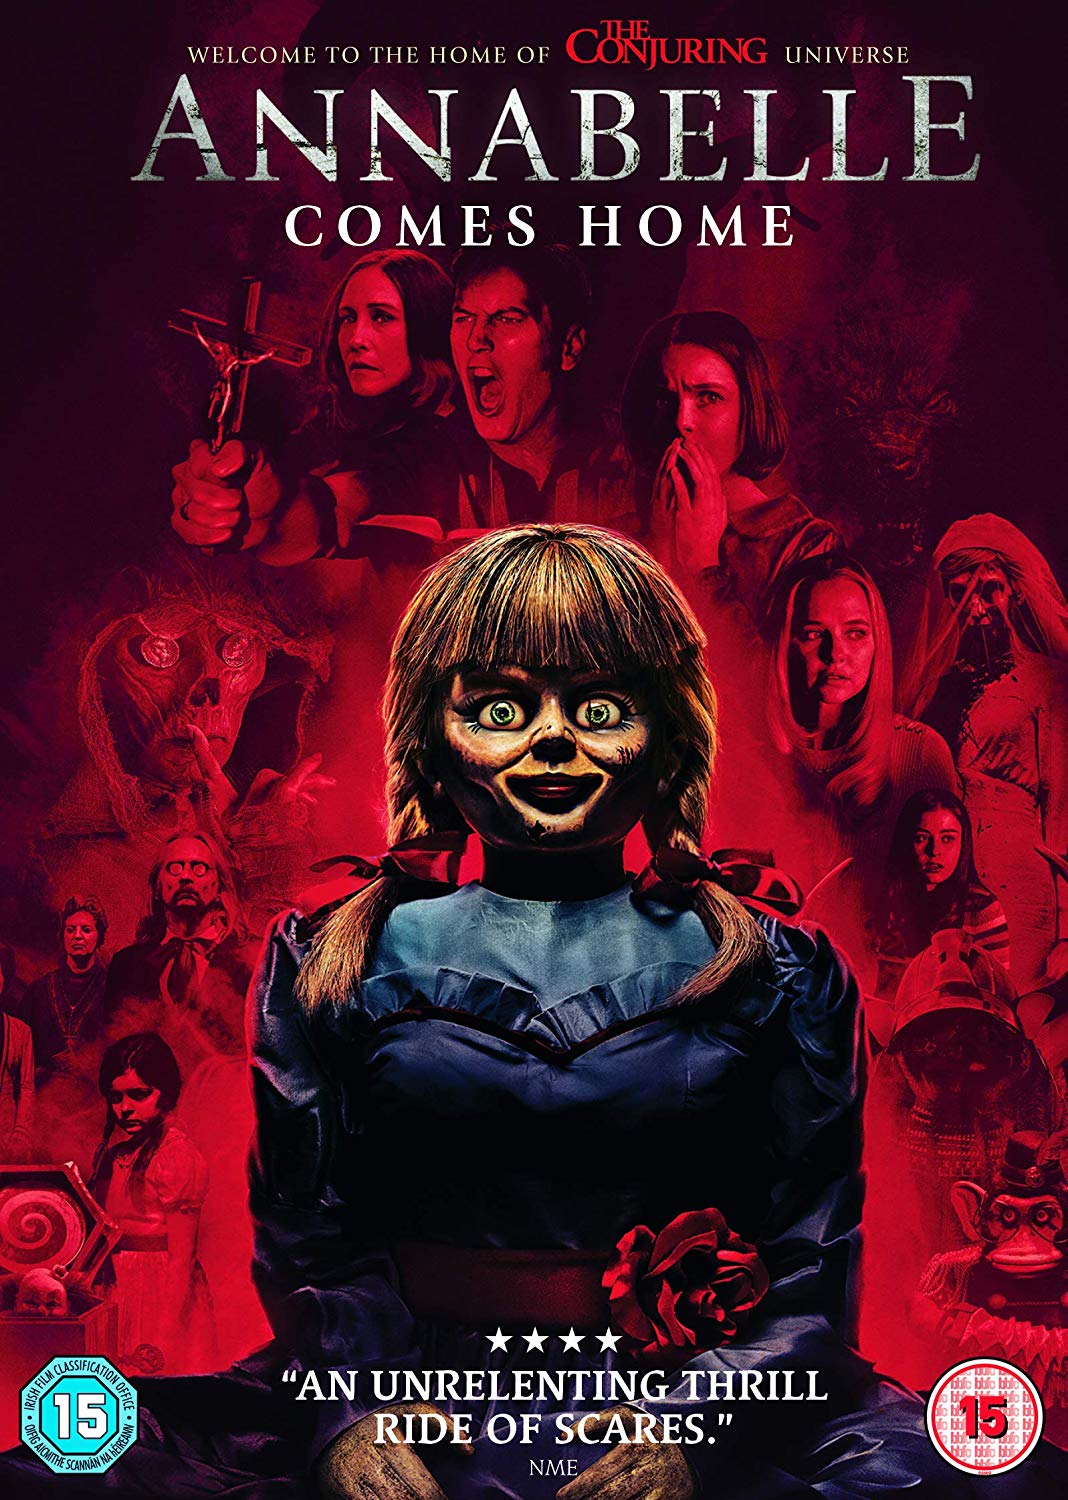 boom competitions - win Annabelle Comes Home on DVD